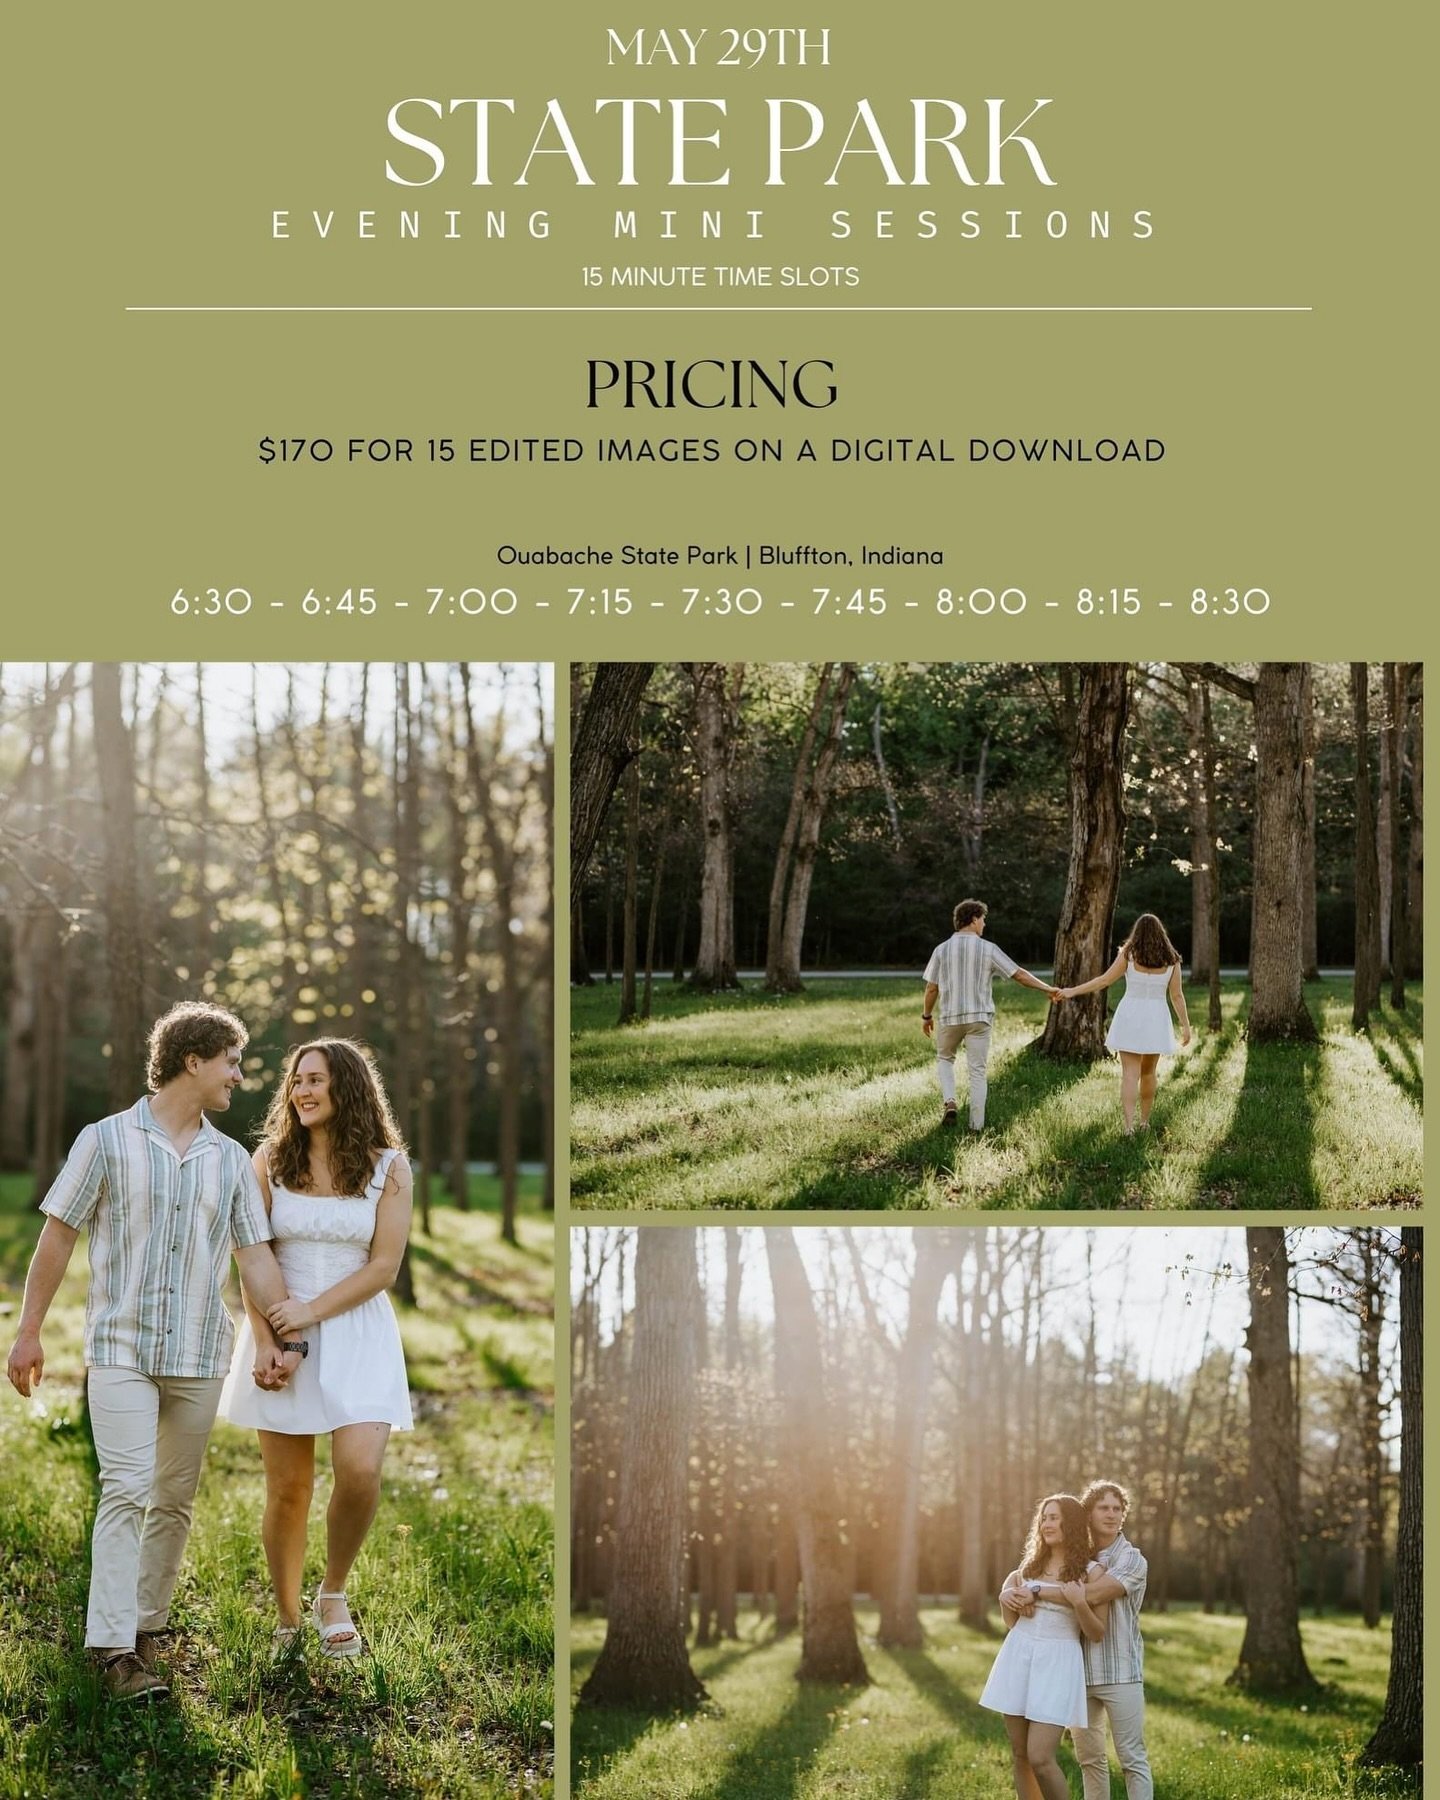 ✨ MAY MINI SESSIONS ✨

I am beyond excited to be hosting a round of minis at Ouabache State Park this month. I am OBSESSED with this area and wanted to share it all with you too. This location has such a dreamy feel to it, making it ideal for familie